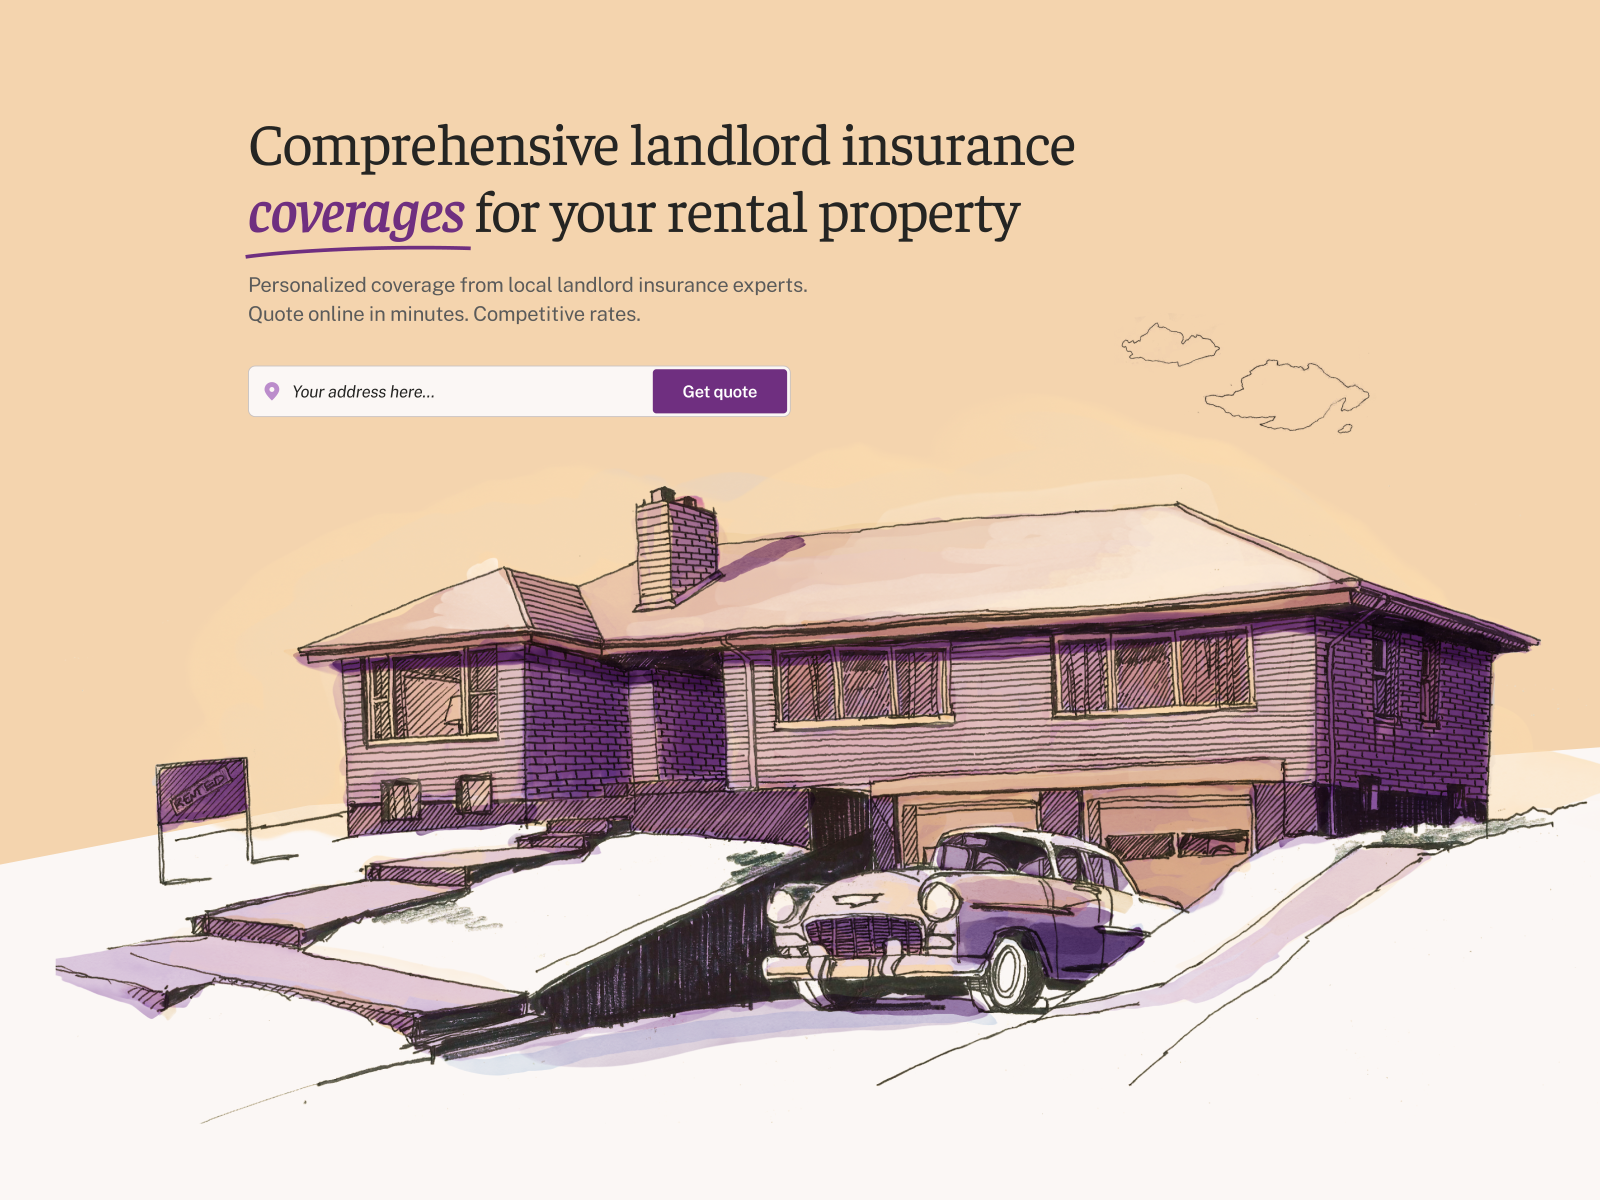 Steadily - Coverages' page hero car design drawing hero house illustration property real estate website